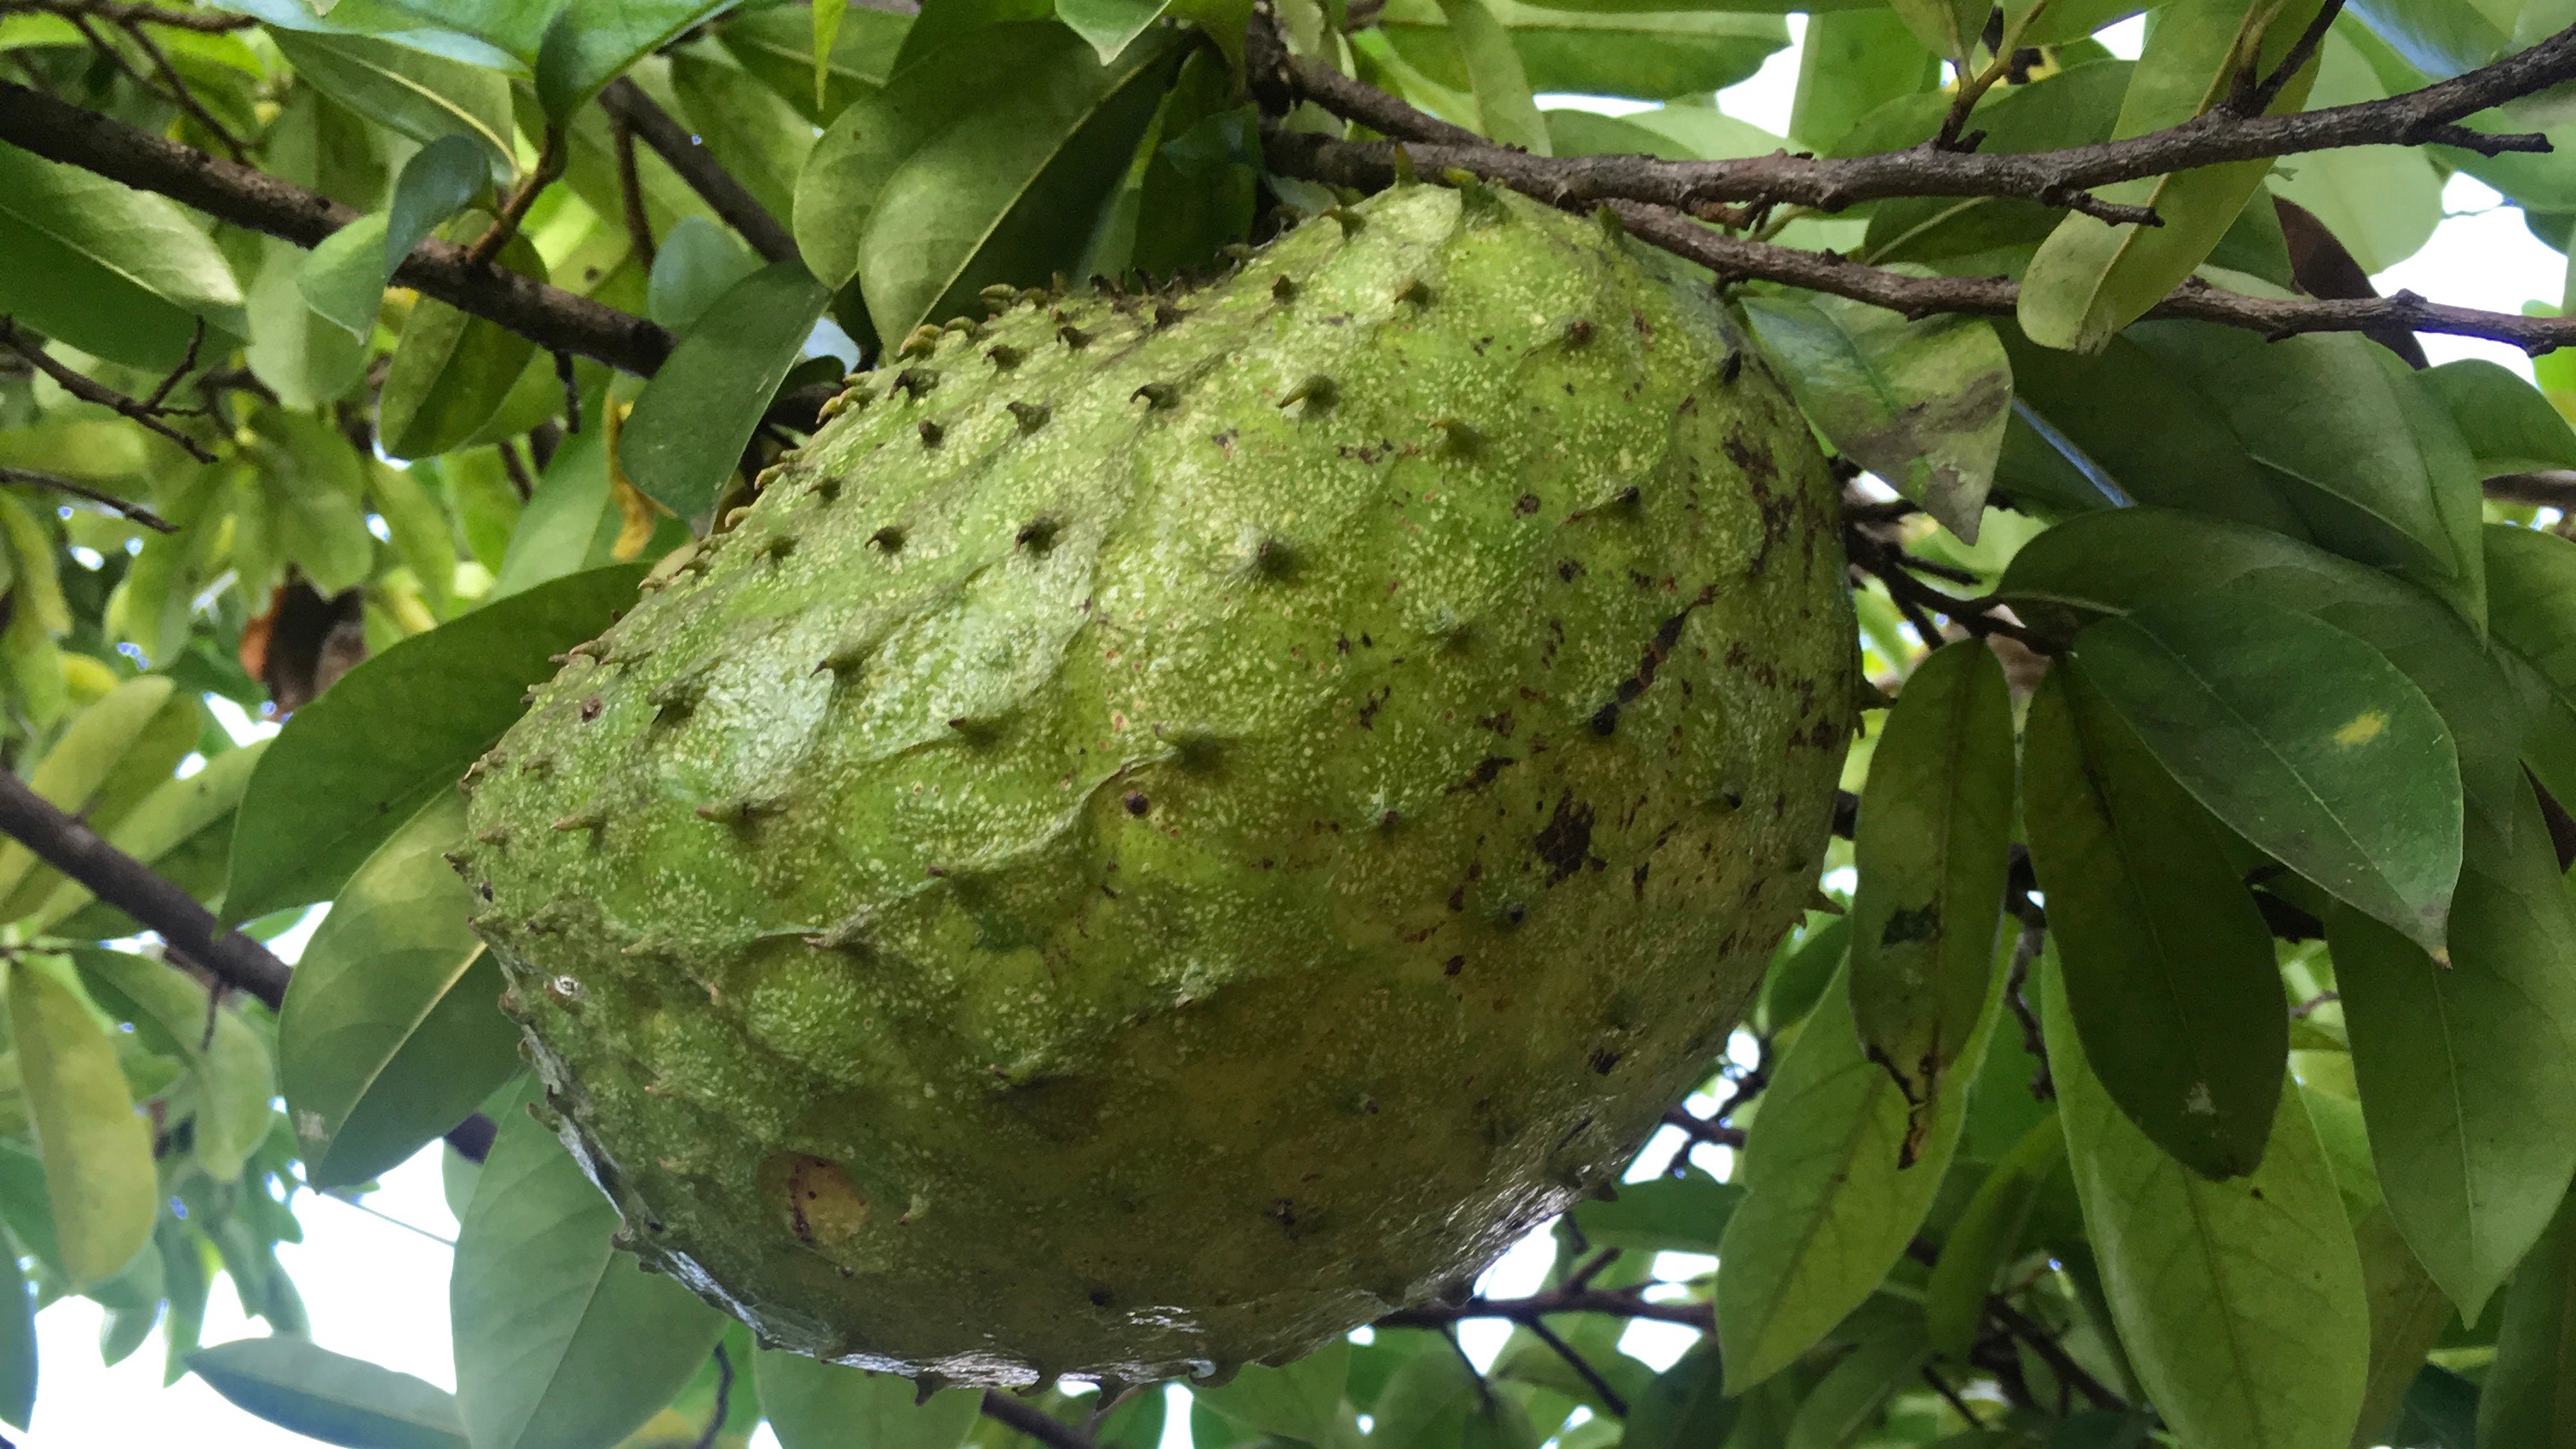 A large soursop on the tree.